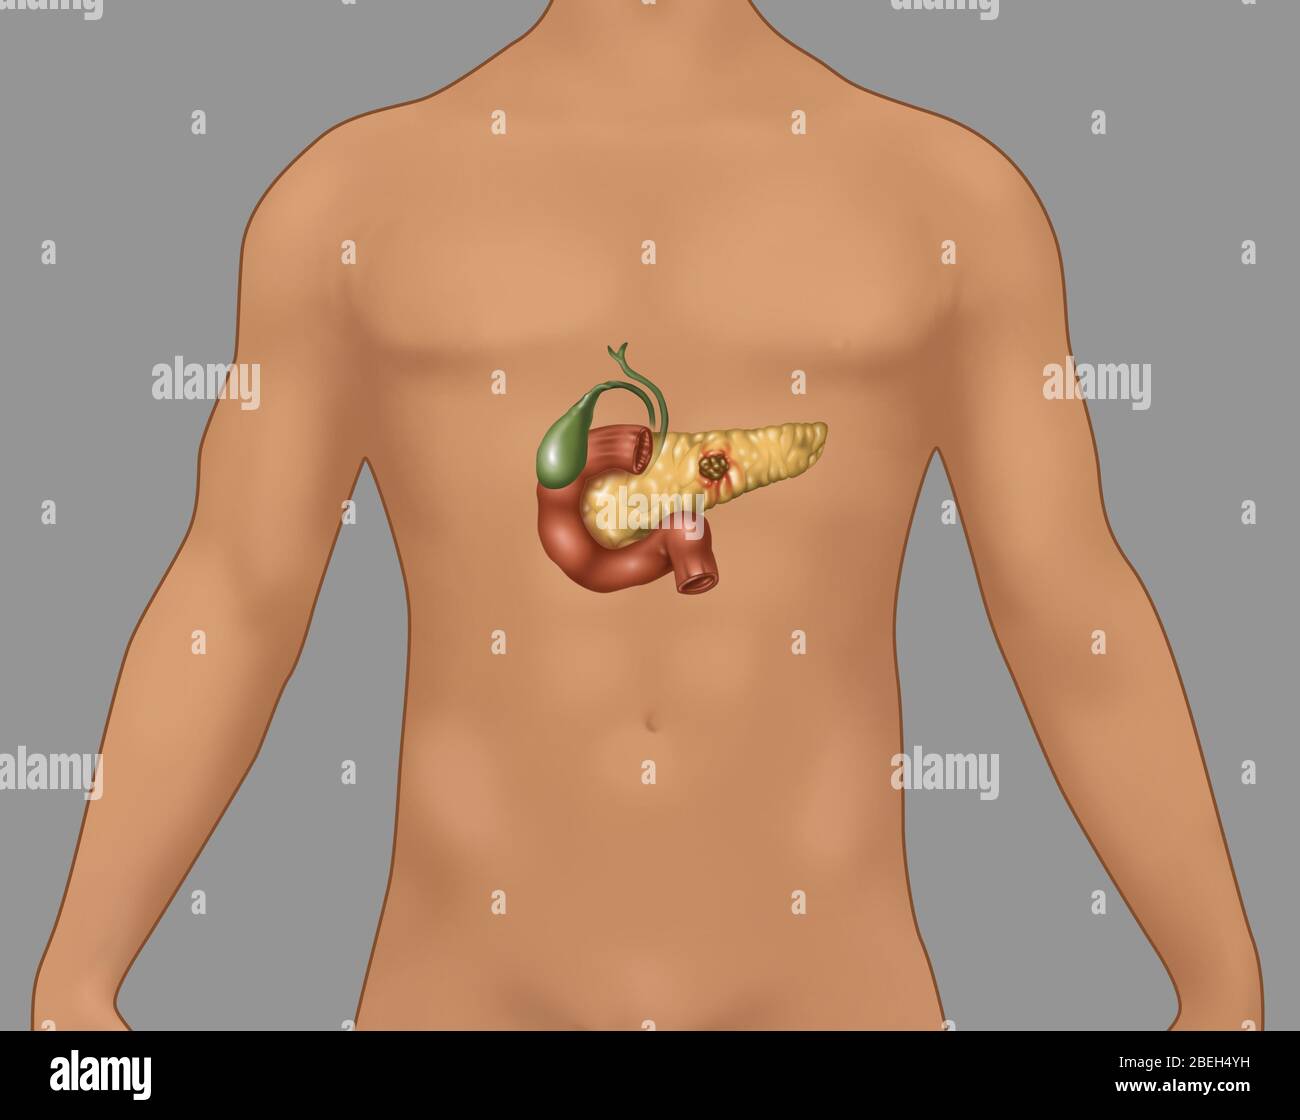 Pancreatic Cancer in Male Figure, Illustration Stock Photo